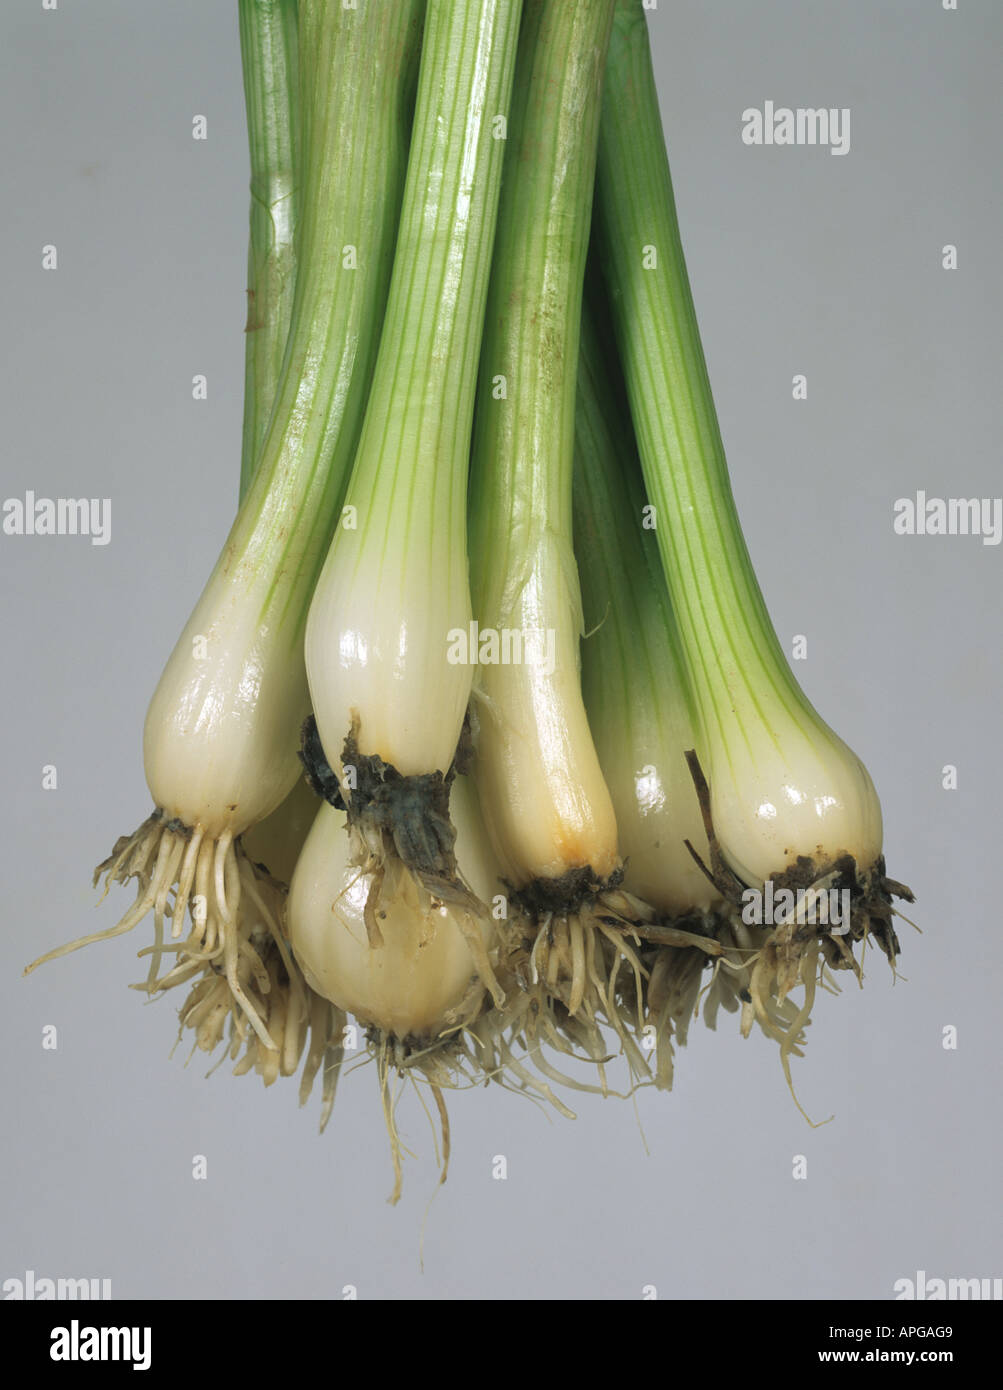 White rot Sclerotinia cepivorum residual mould development on washed spring onion roots Stock Photo